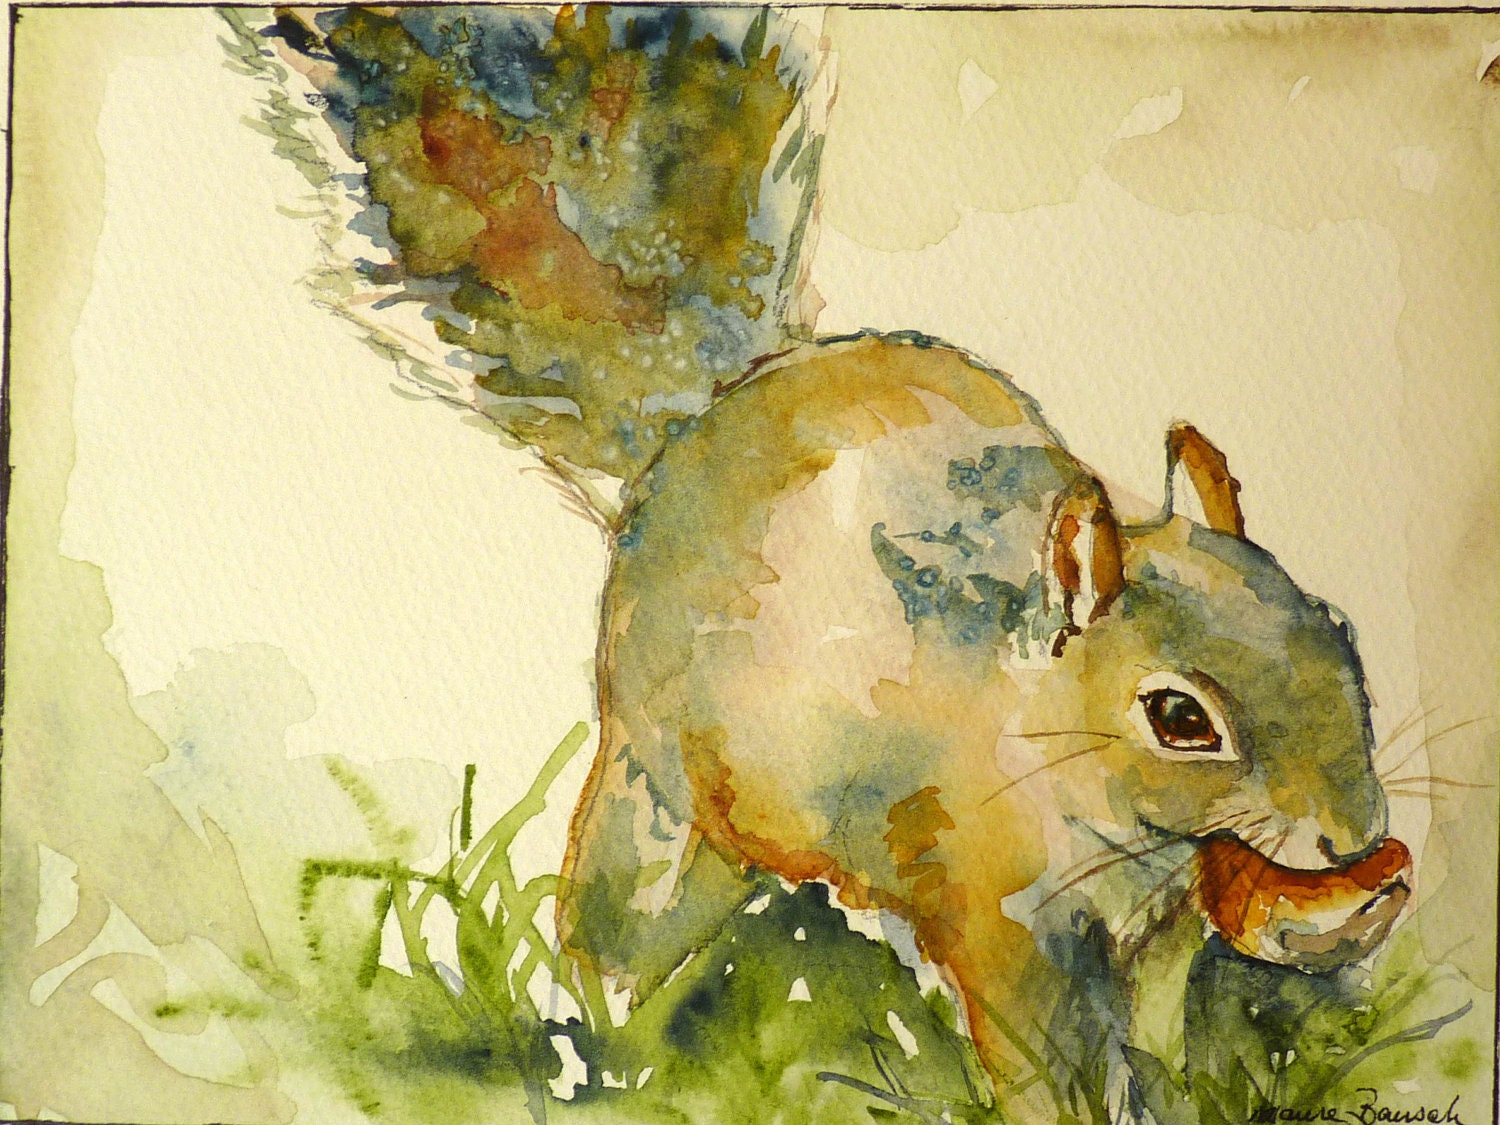 Squirrel Watercolor Art Print by Maure Bausch - twopoots